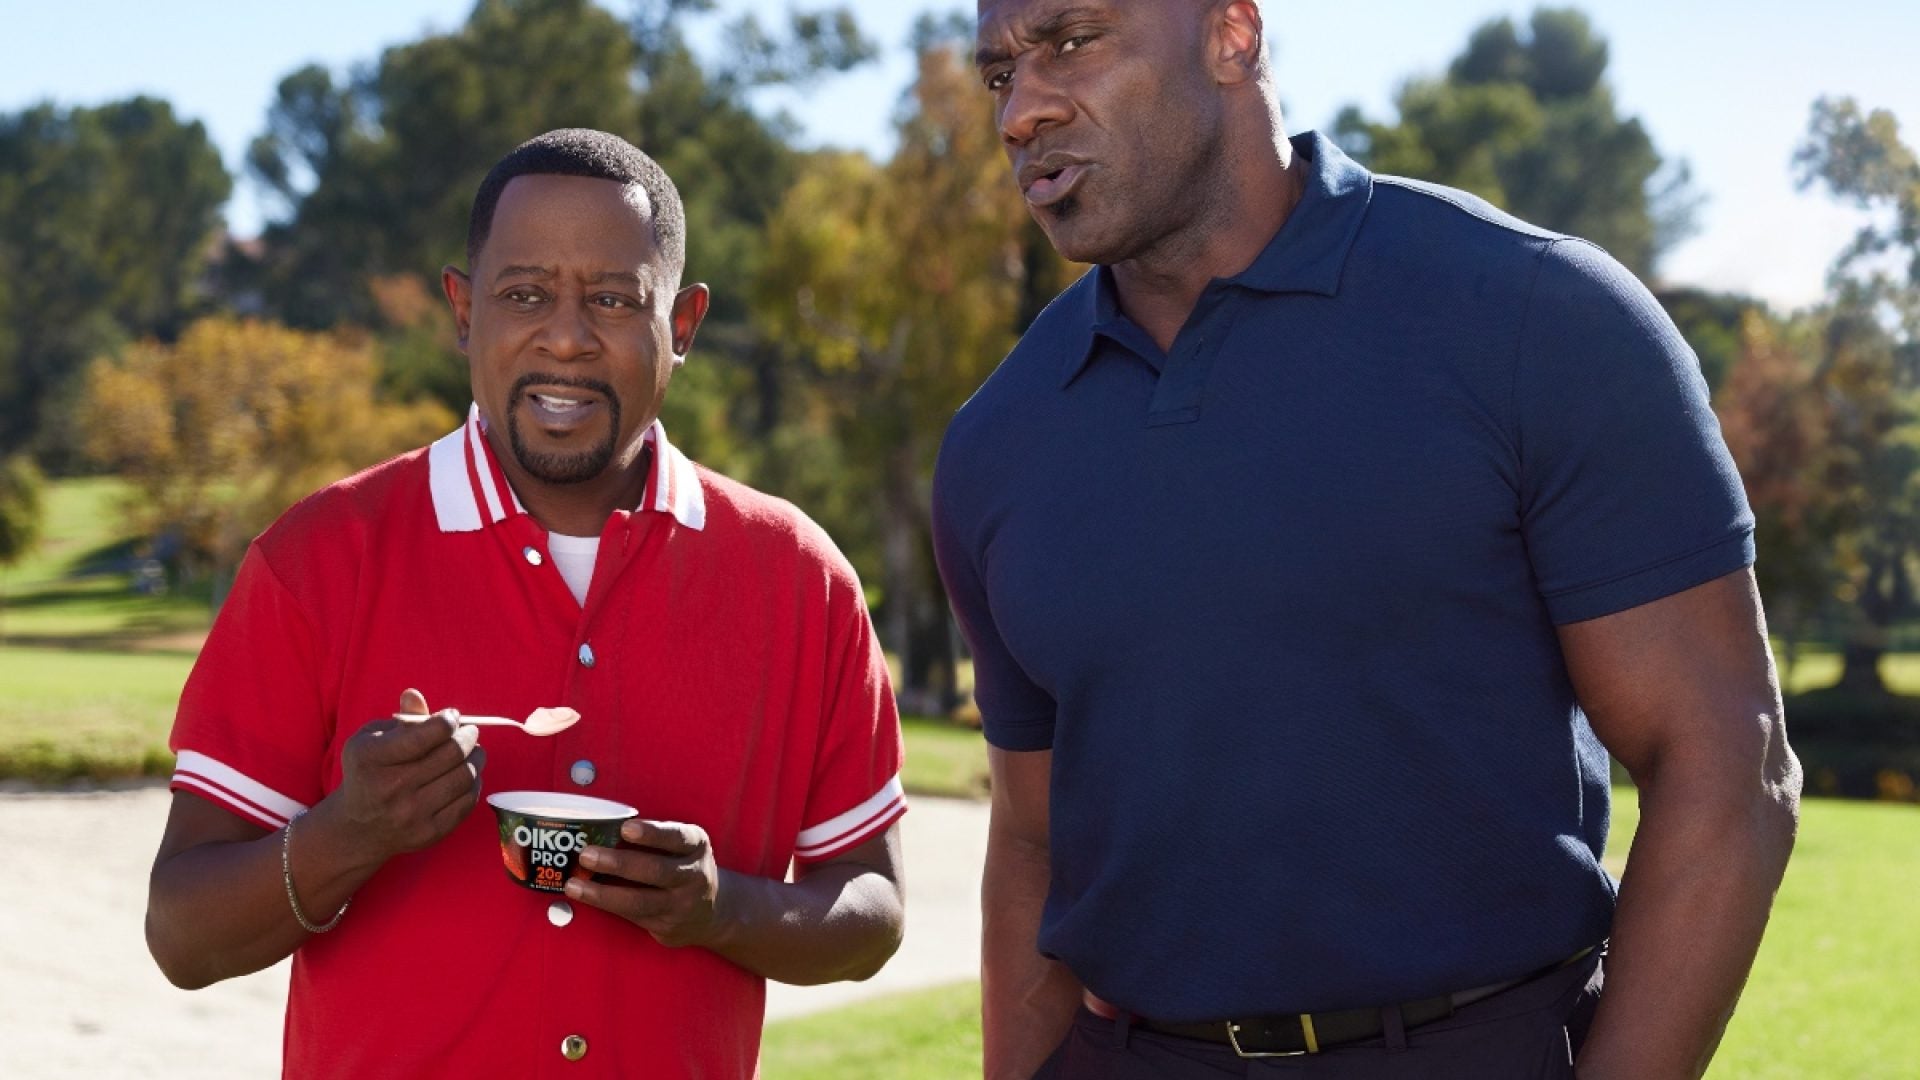 Martin Lawrence Teams Up With Shannon Sharpe For Hilarious Super Bowl Ad